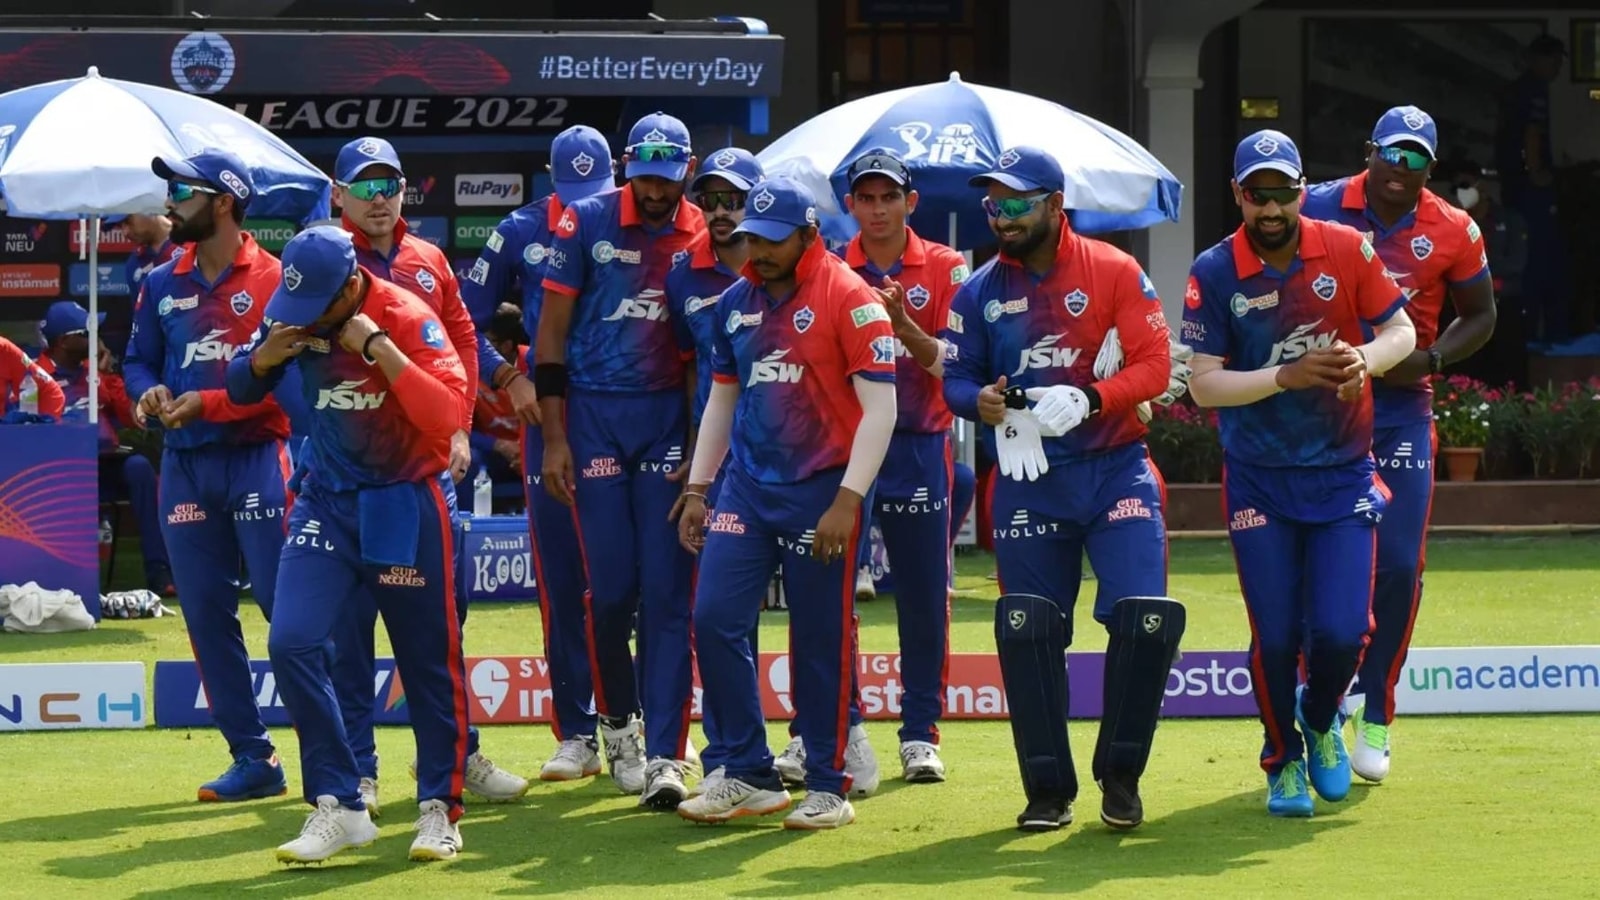 Delhi Capitals - Which Delhi Capitals bowler will give away the least  number of runs in the match on 25th April '21? Make your prediction now and  stand a chance to win